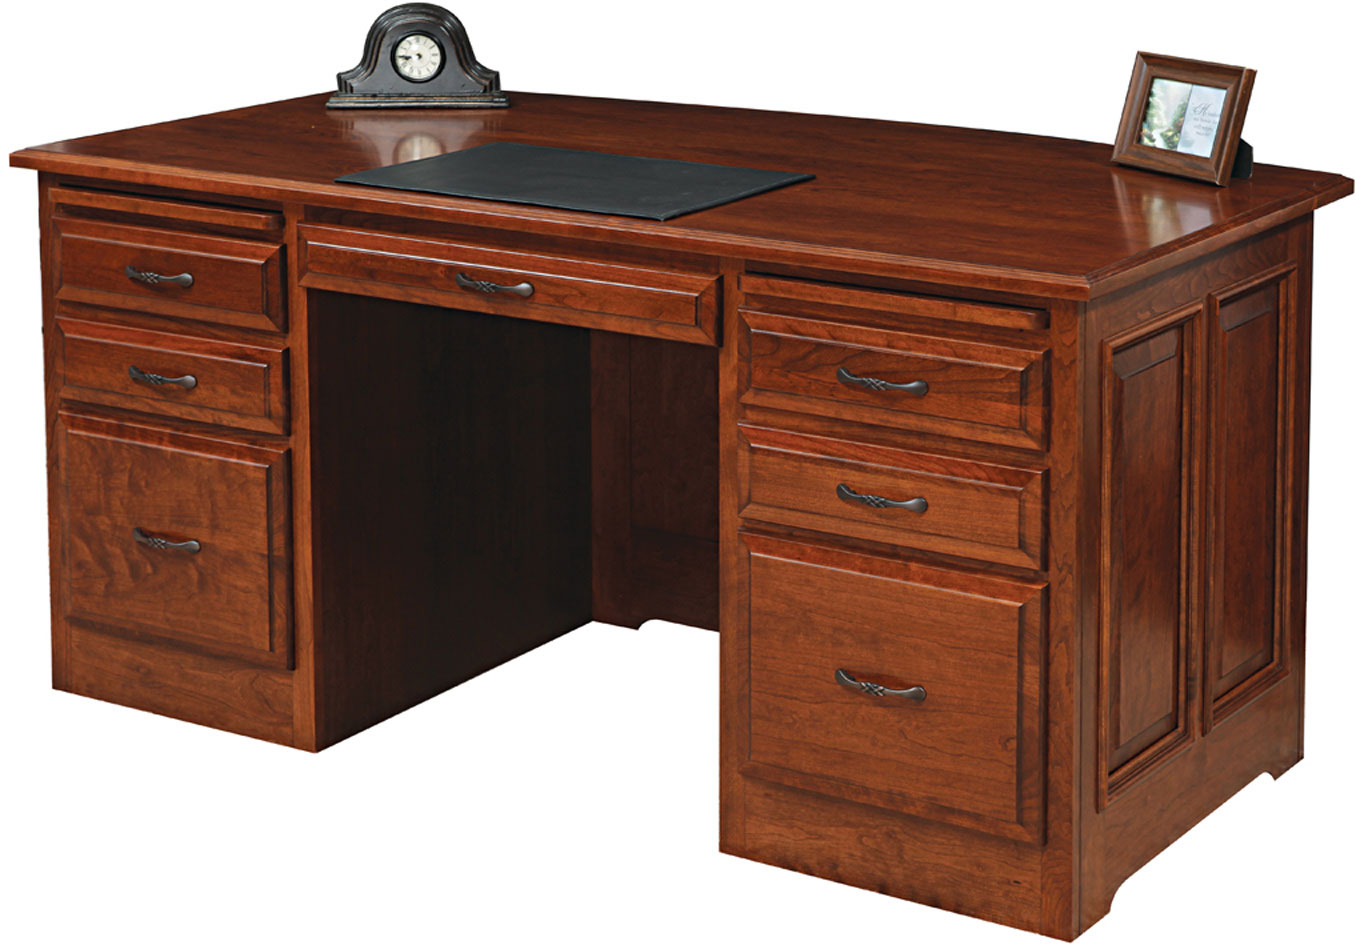 Liberty Series Executive Desk shown in Cherry with OCS Rich Cherry Stain